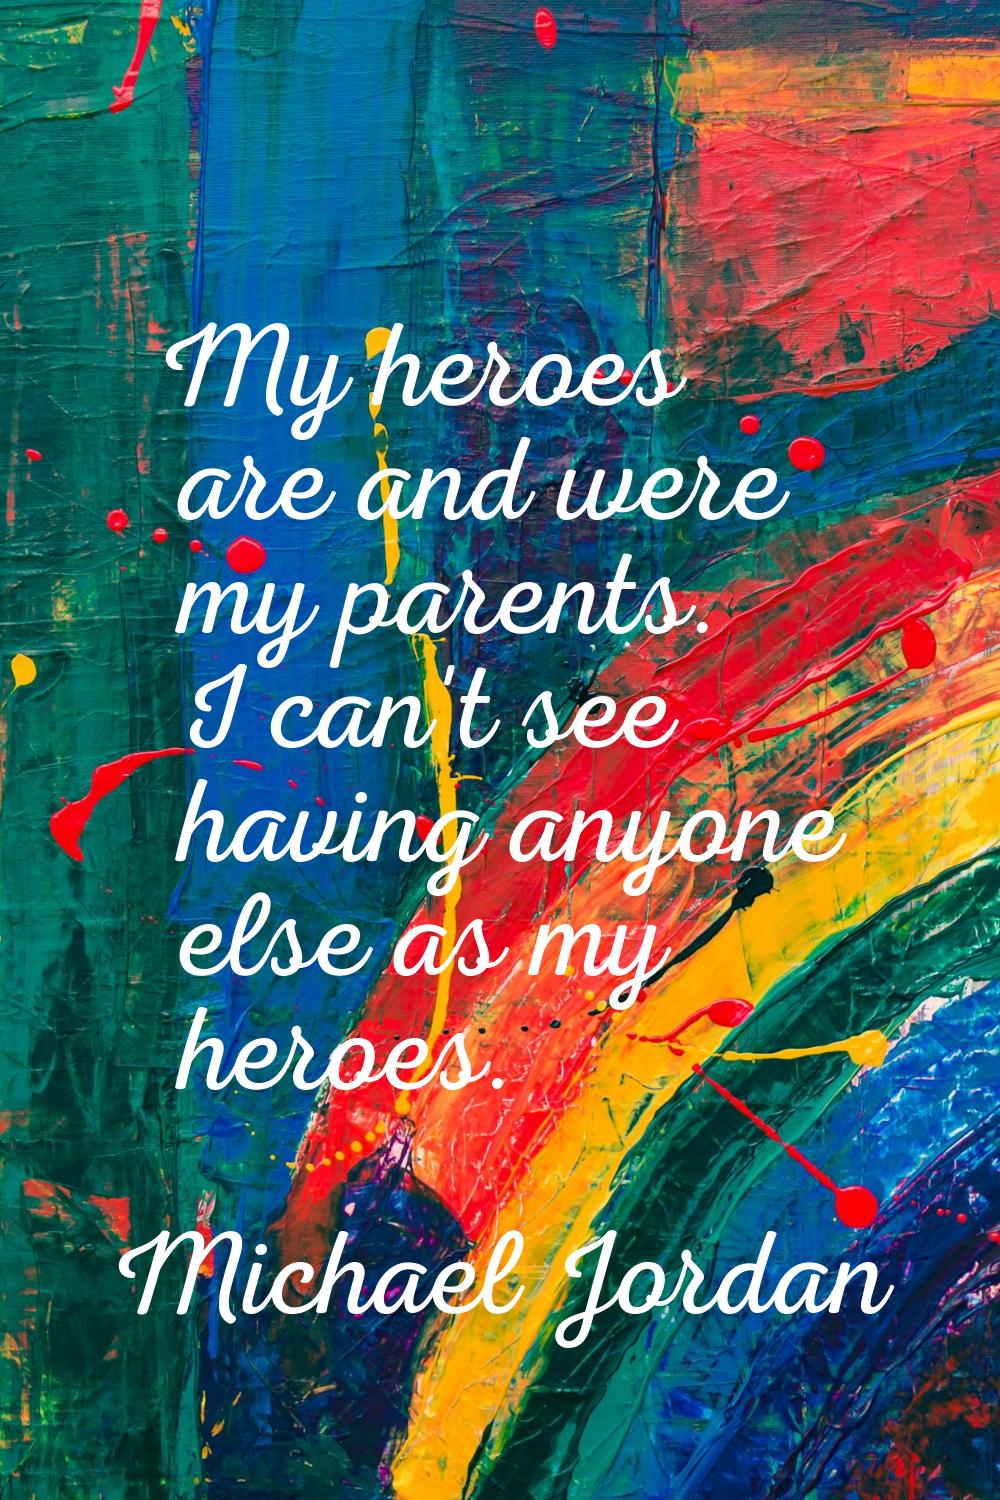 My heroes are and were my parents. I can't see having anyone else as my heroes.